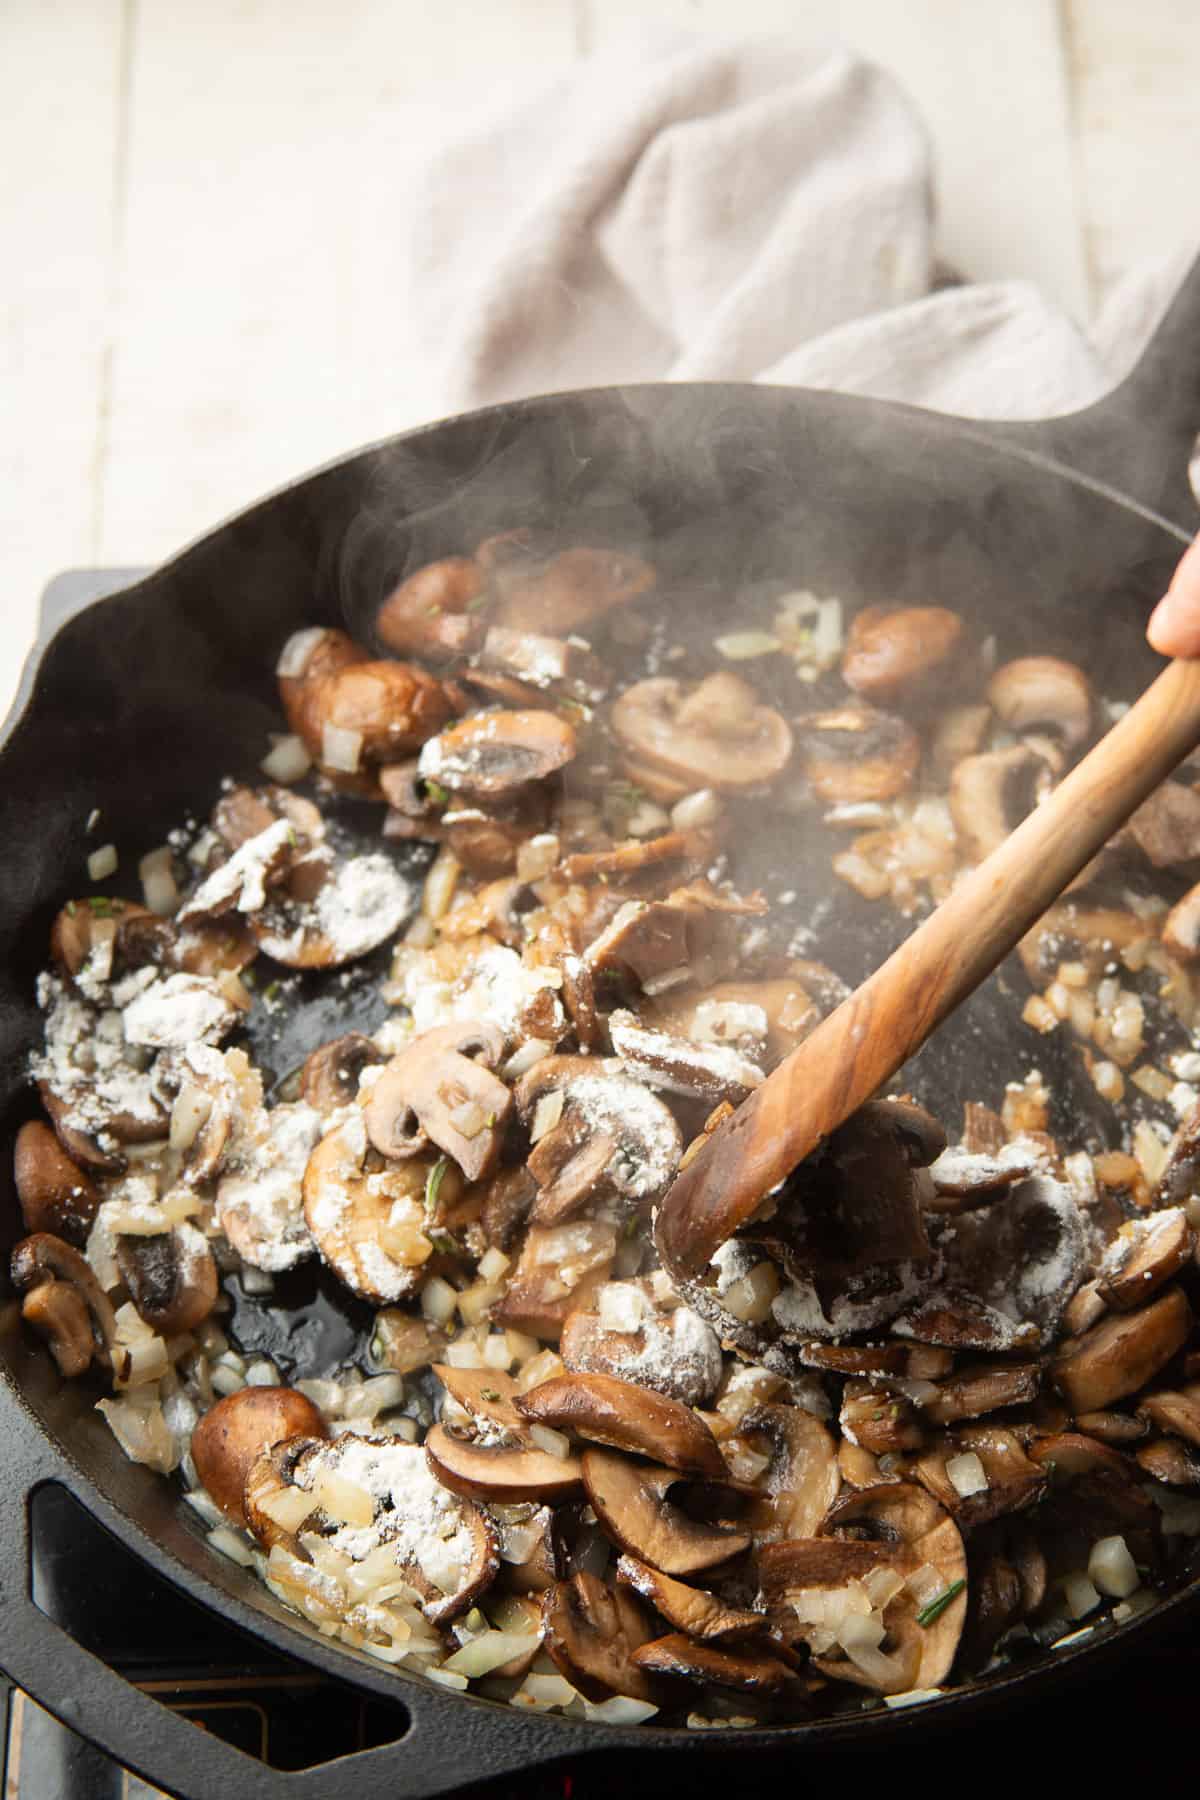 Mushrooms and onions cooking in a skillet with flour sprinkled on top.